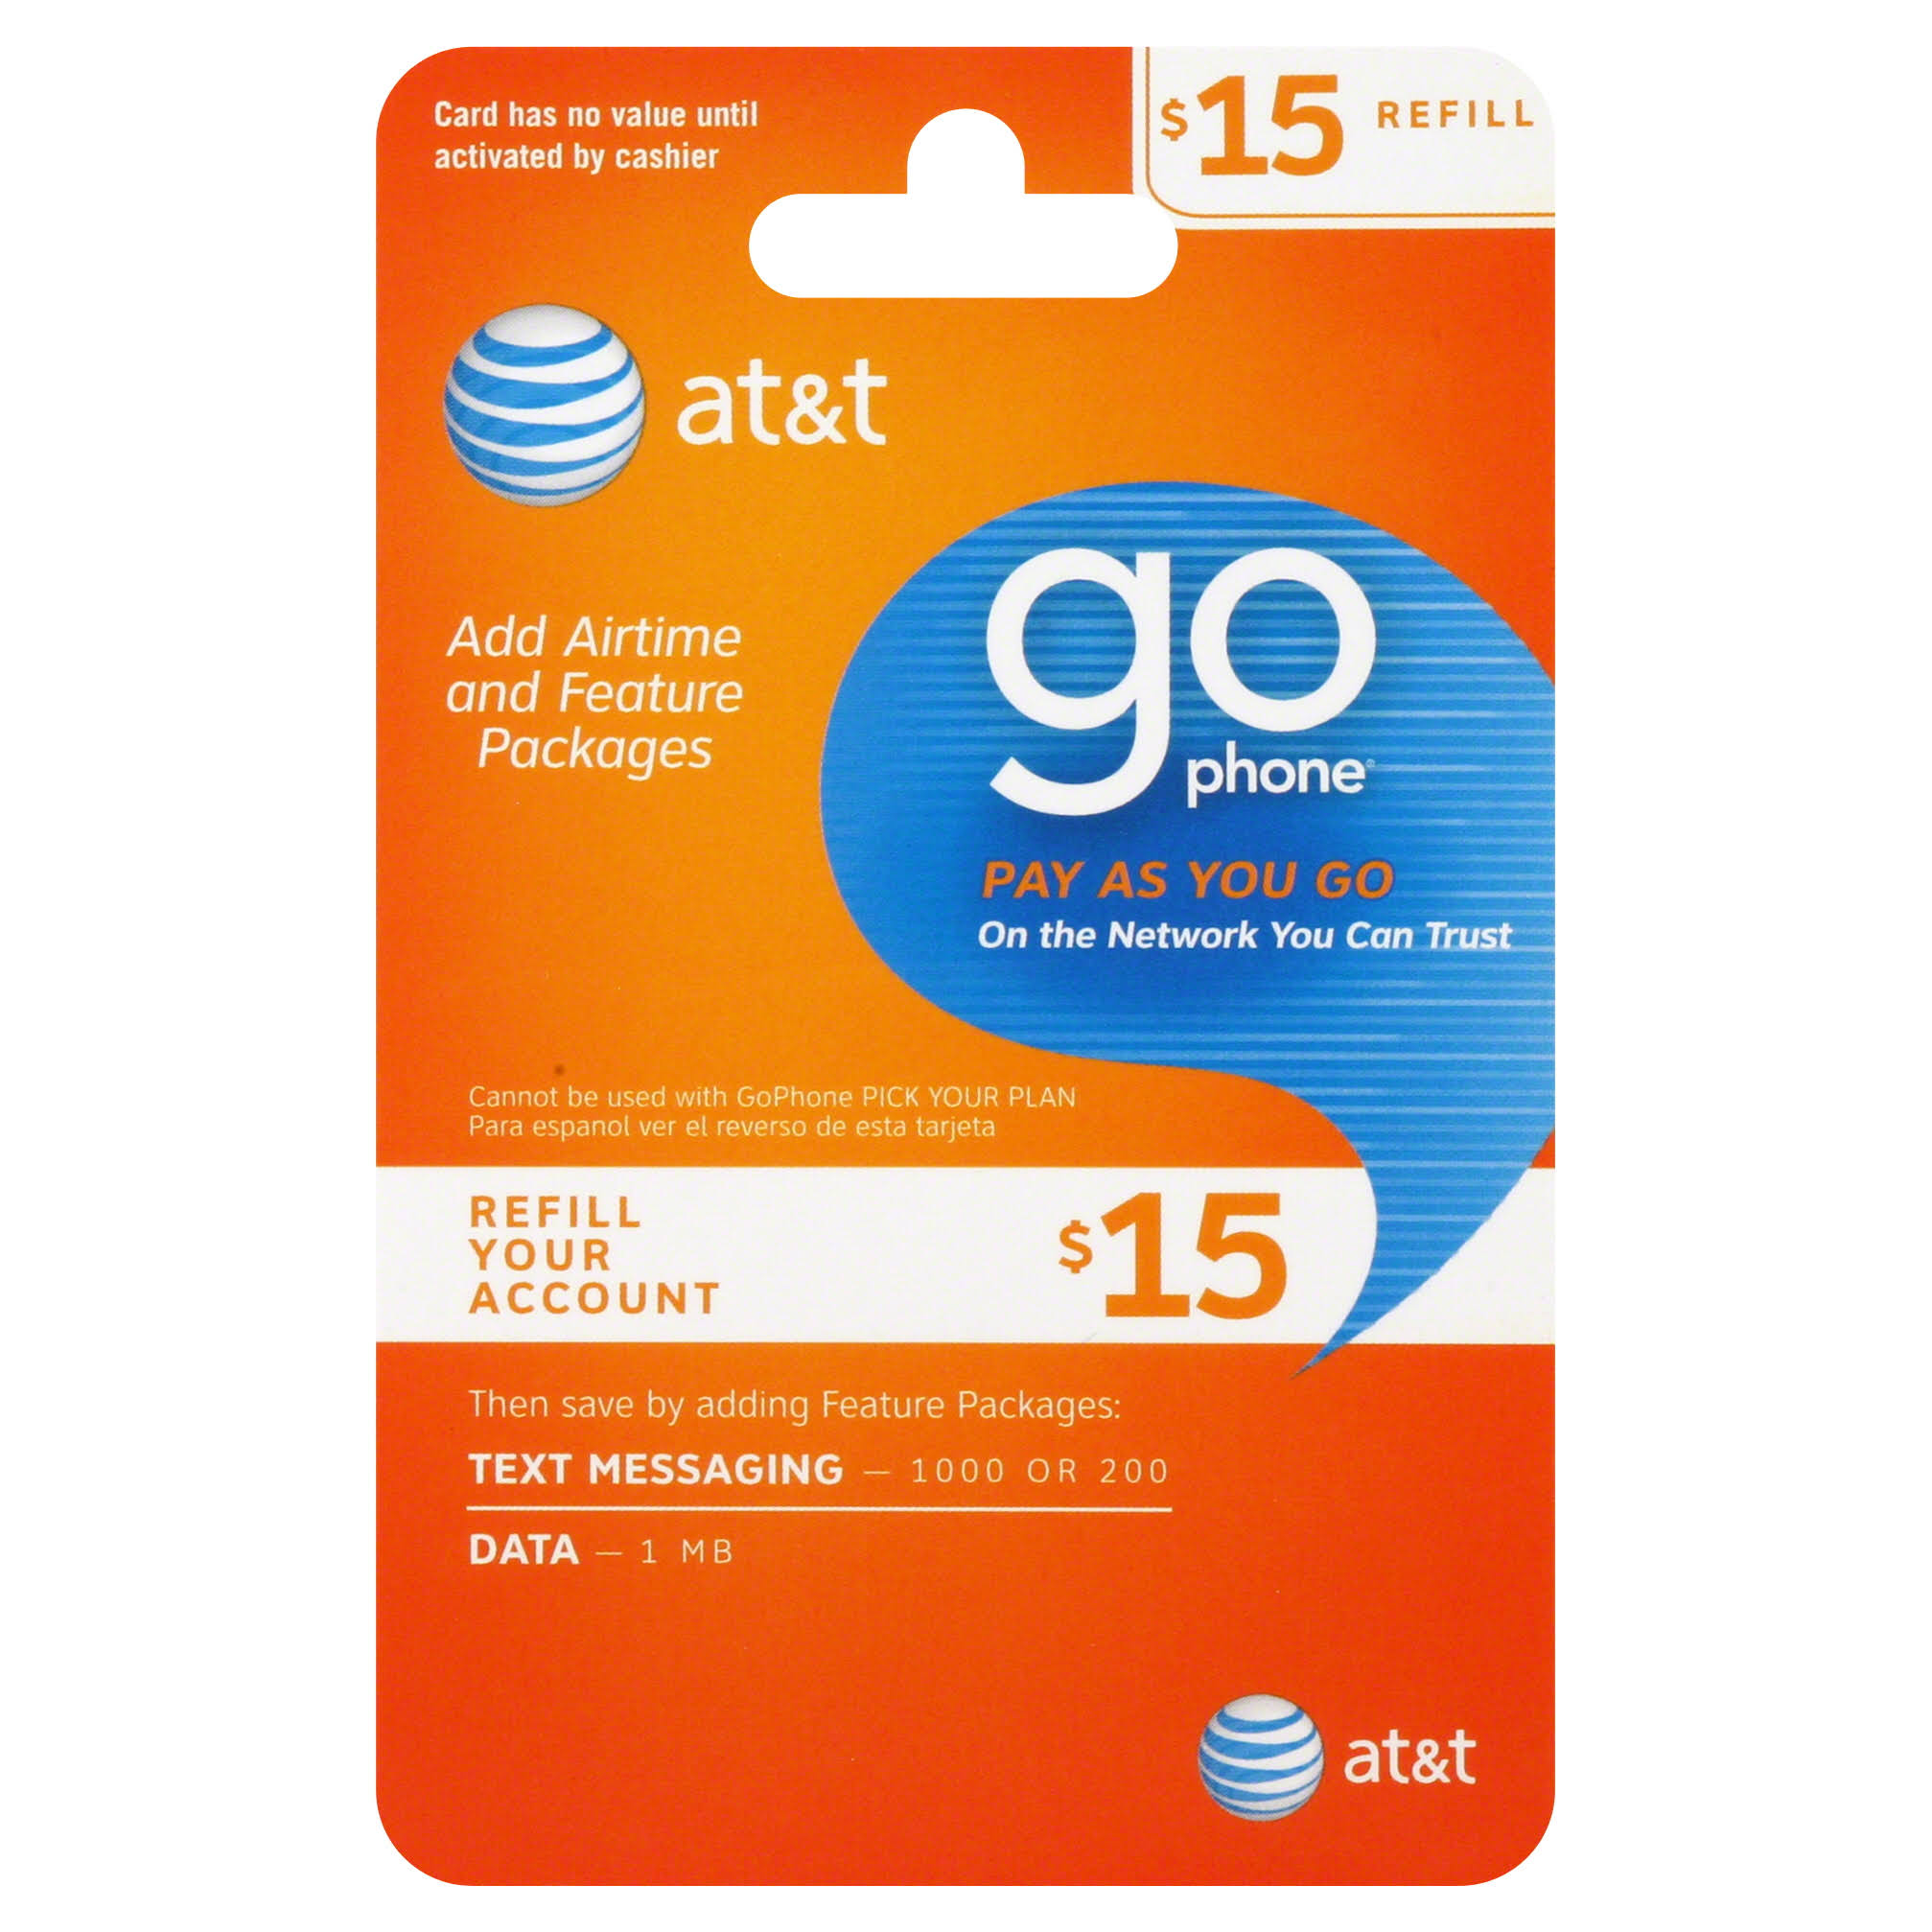 AT & T Go Phone Pay As You Go Refill Card - $15